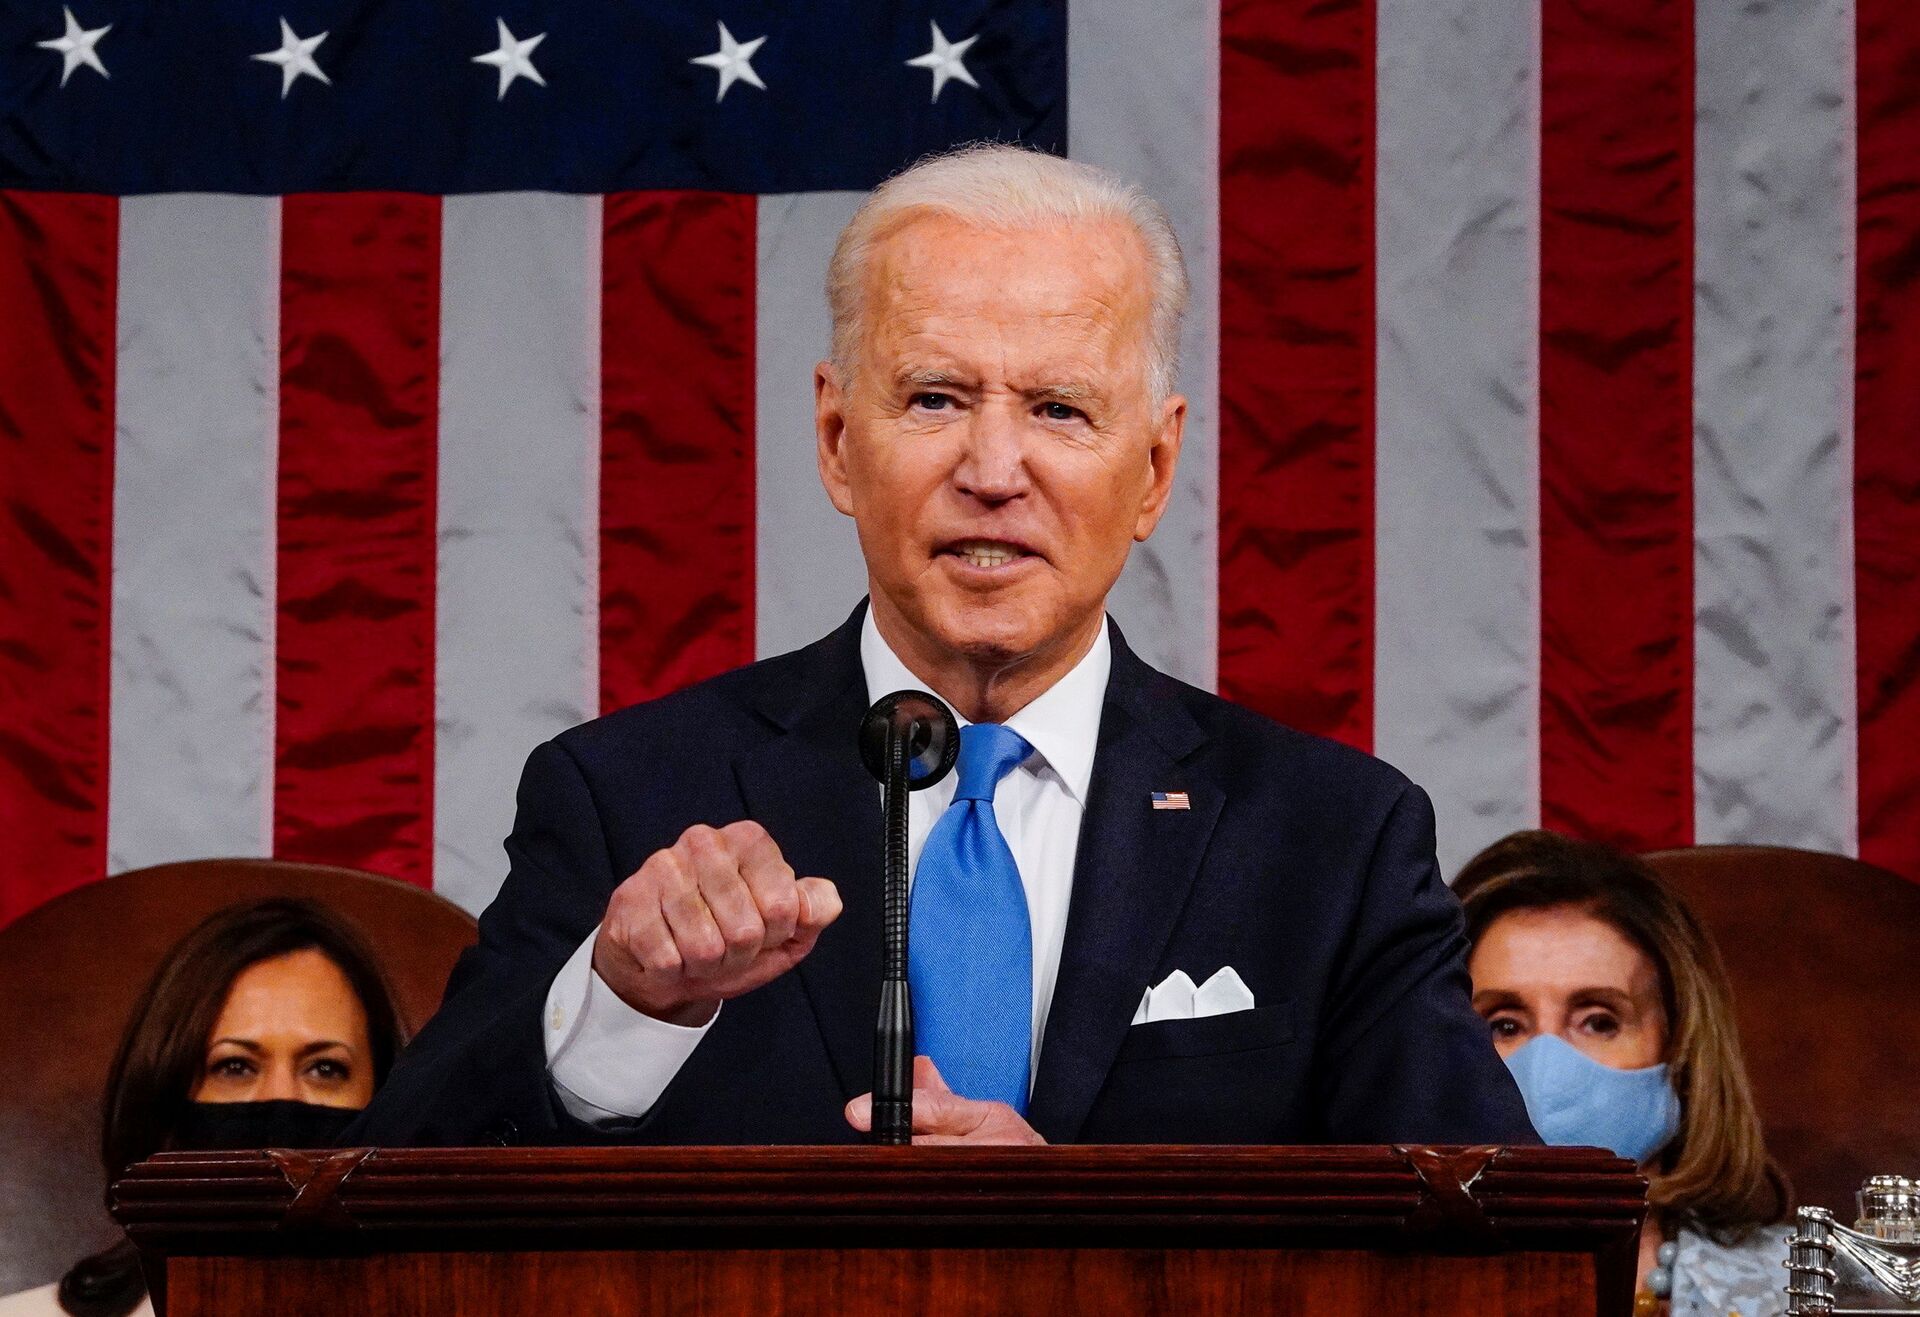 US President Joe Biden addresses to a joint session of Congress in the House chamber of the US Capitol in Washington, US, April 28, 2021 - Sputnik International, 1920, 29.09.2021